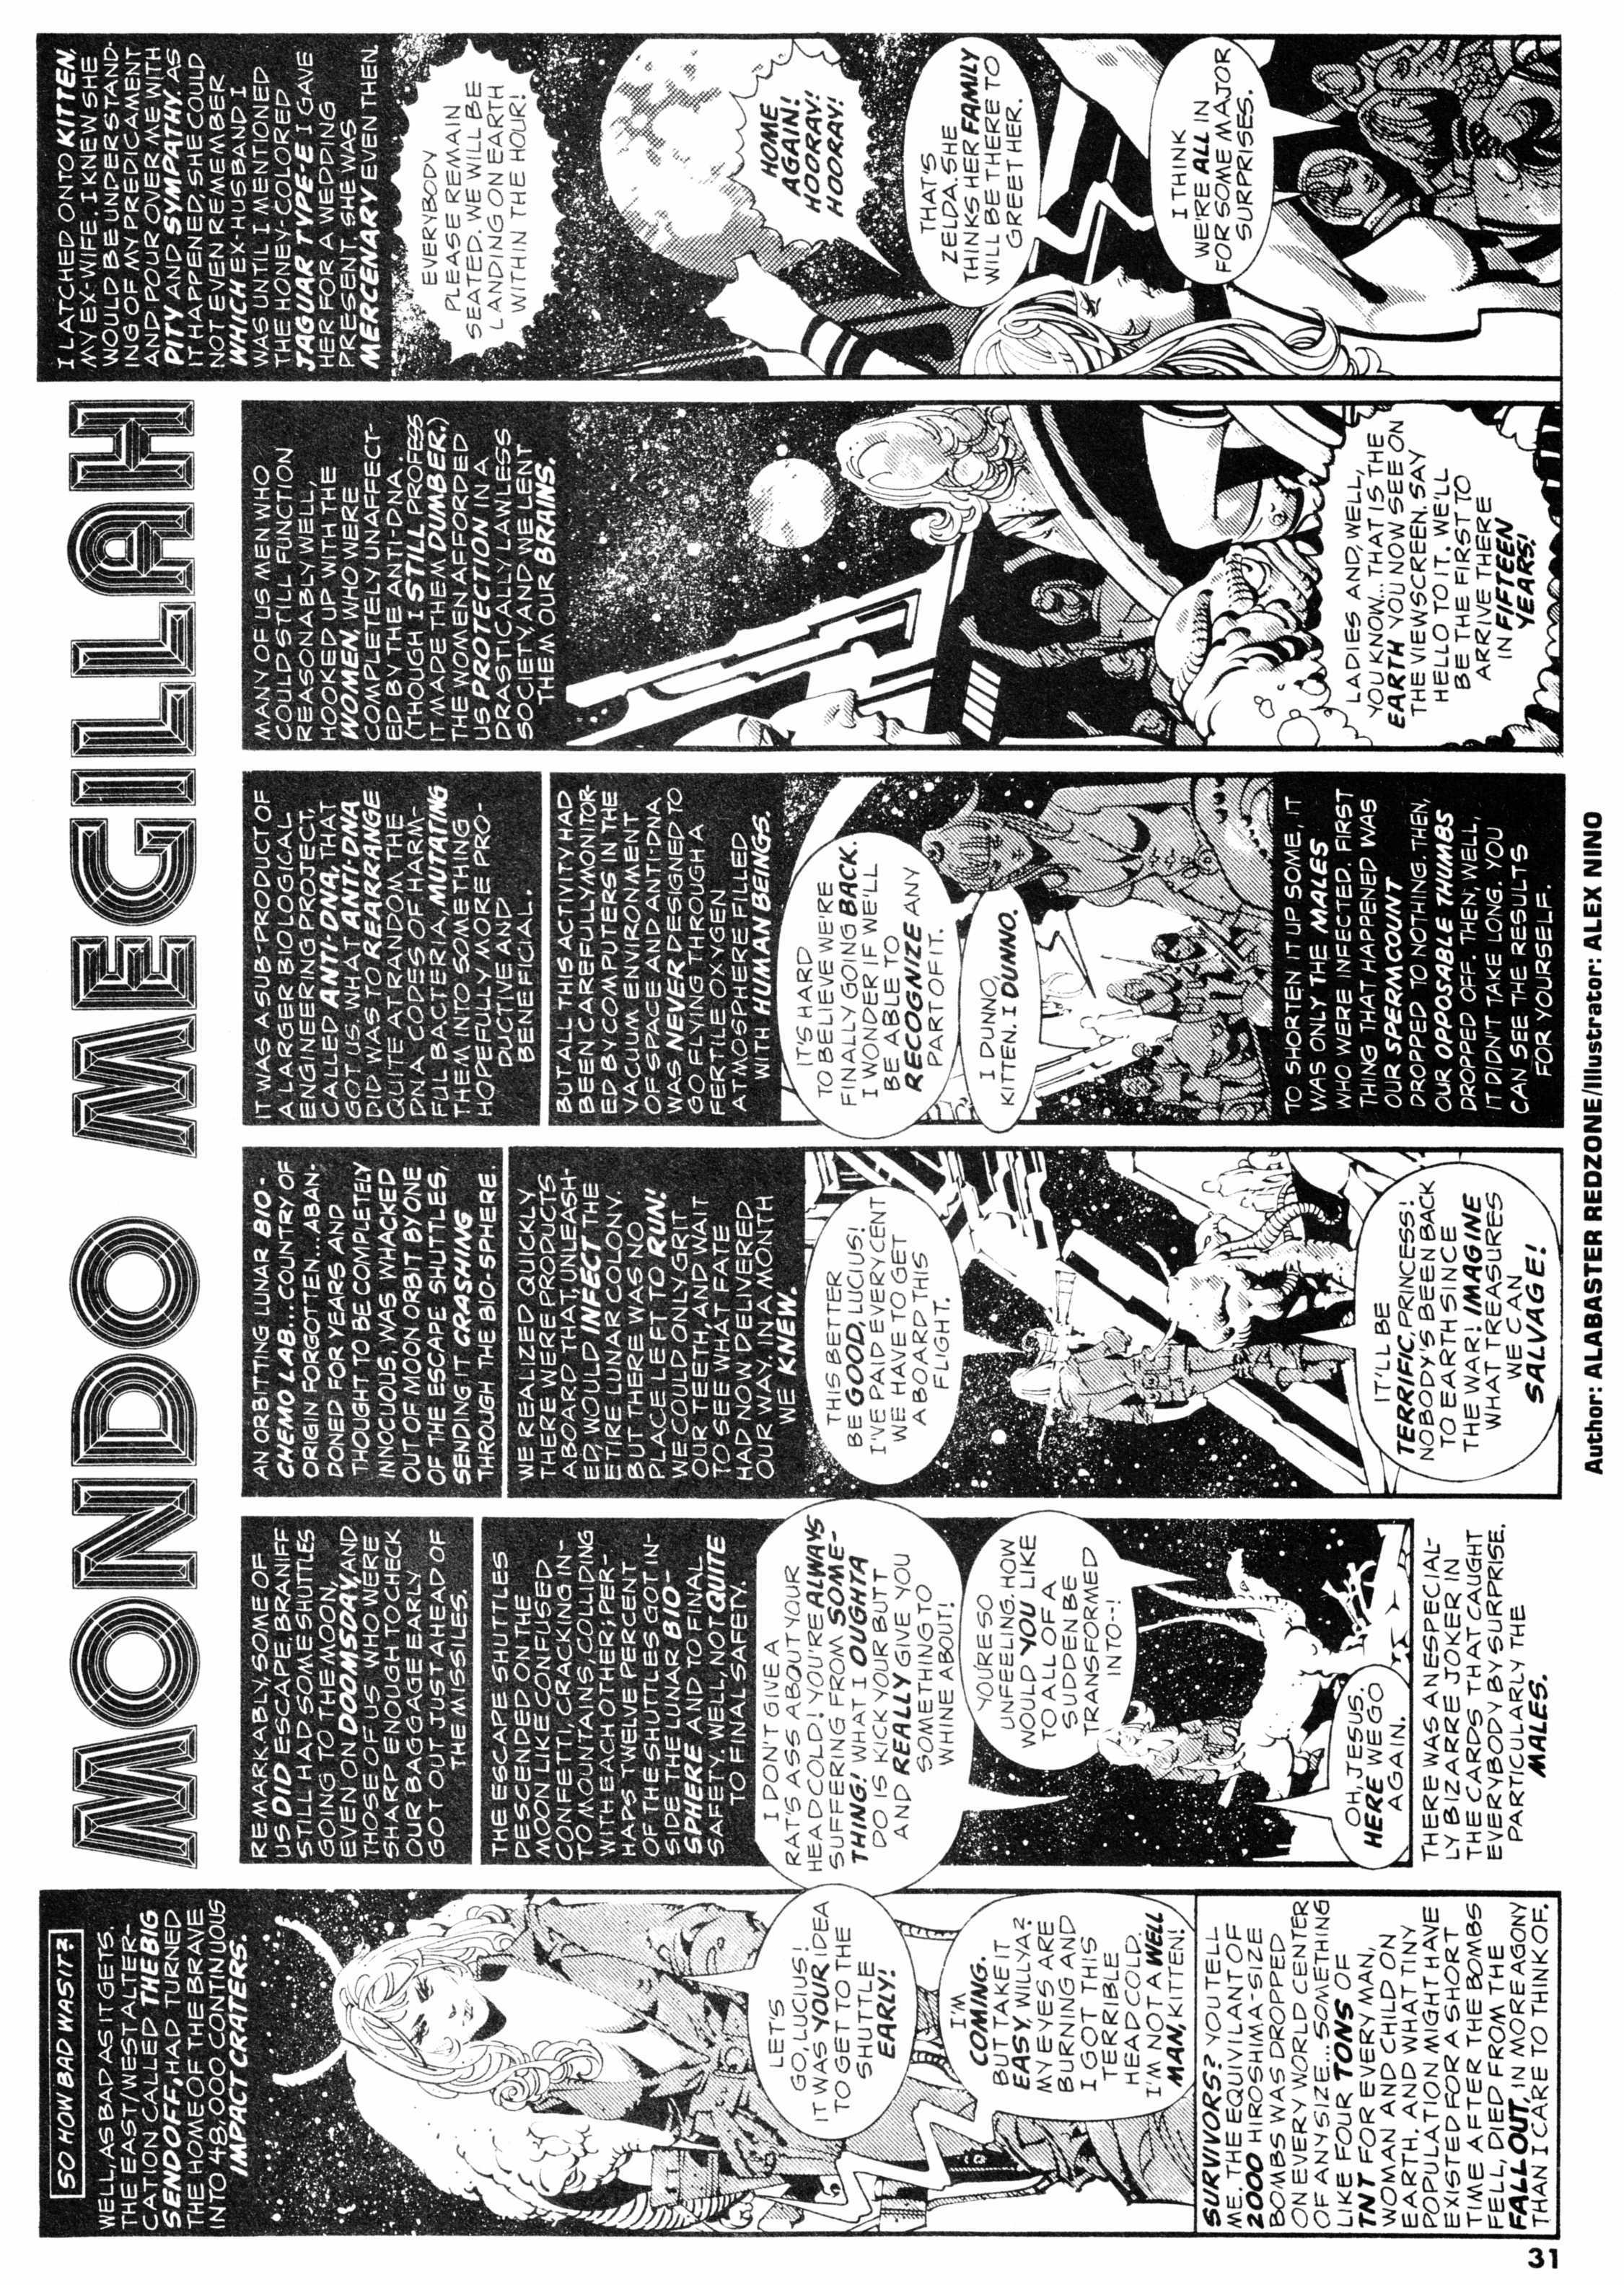 Read online 1984 comic -  Issue #4 - 25